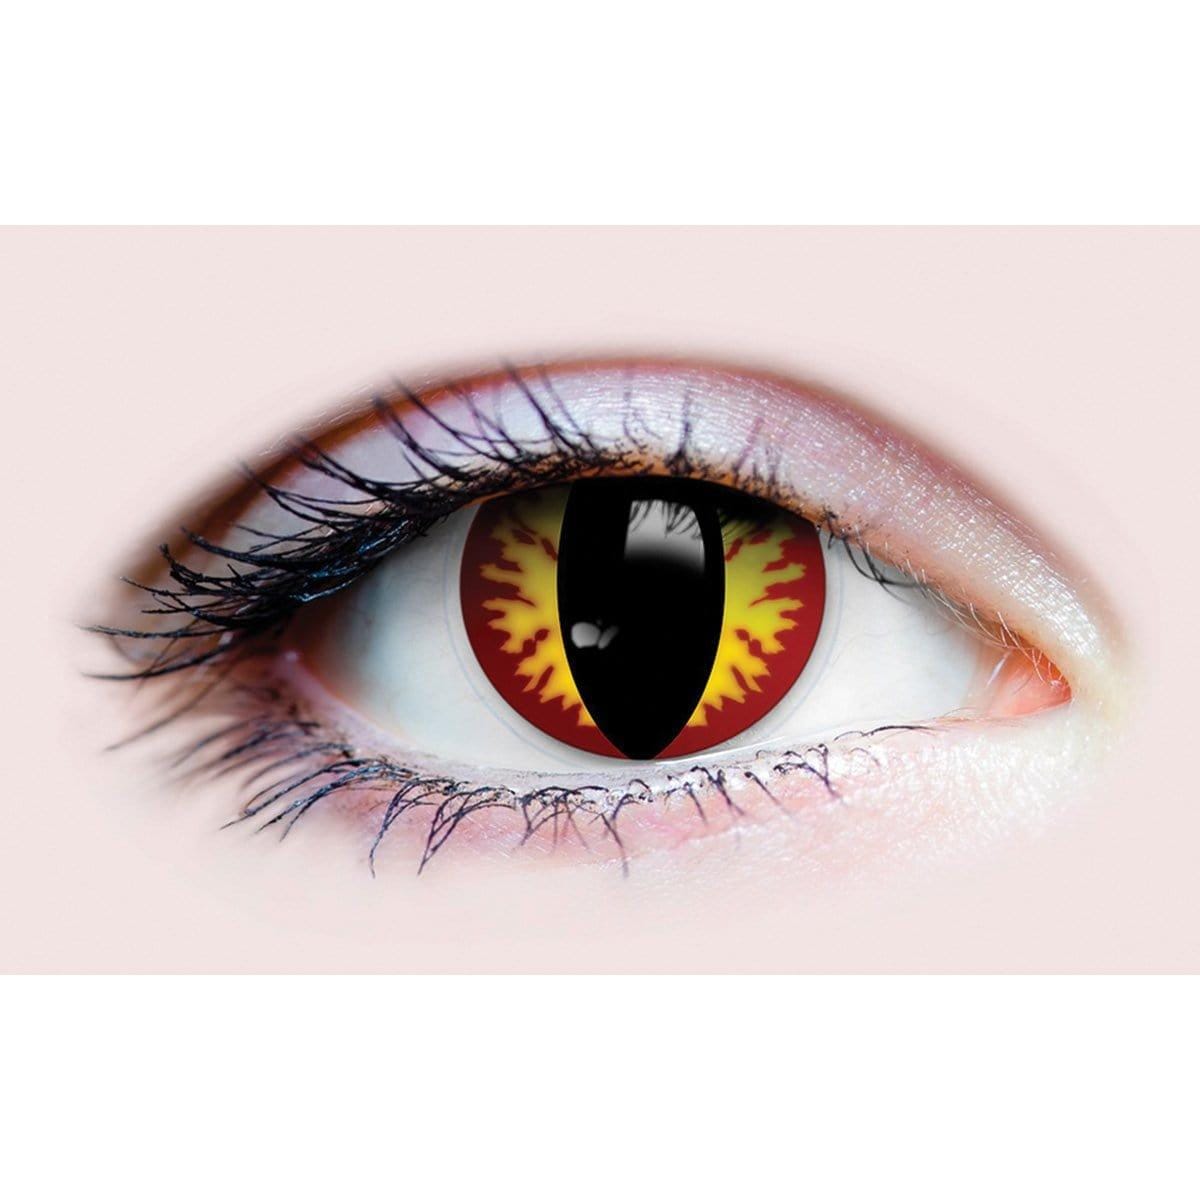 Buy Costume Accessories Dragon contact lenses, 3 months usage sold at Party Expert